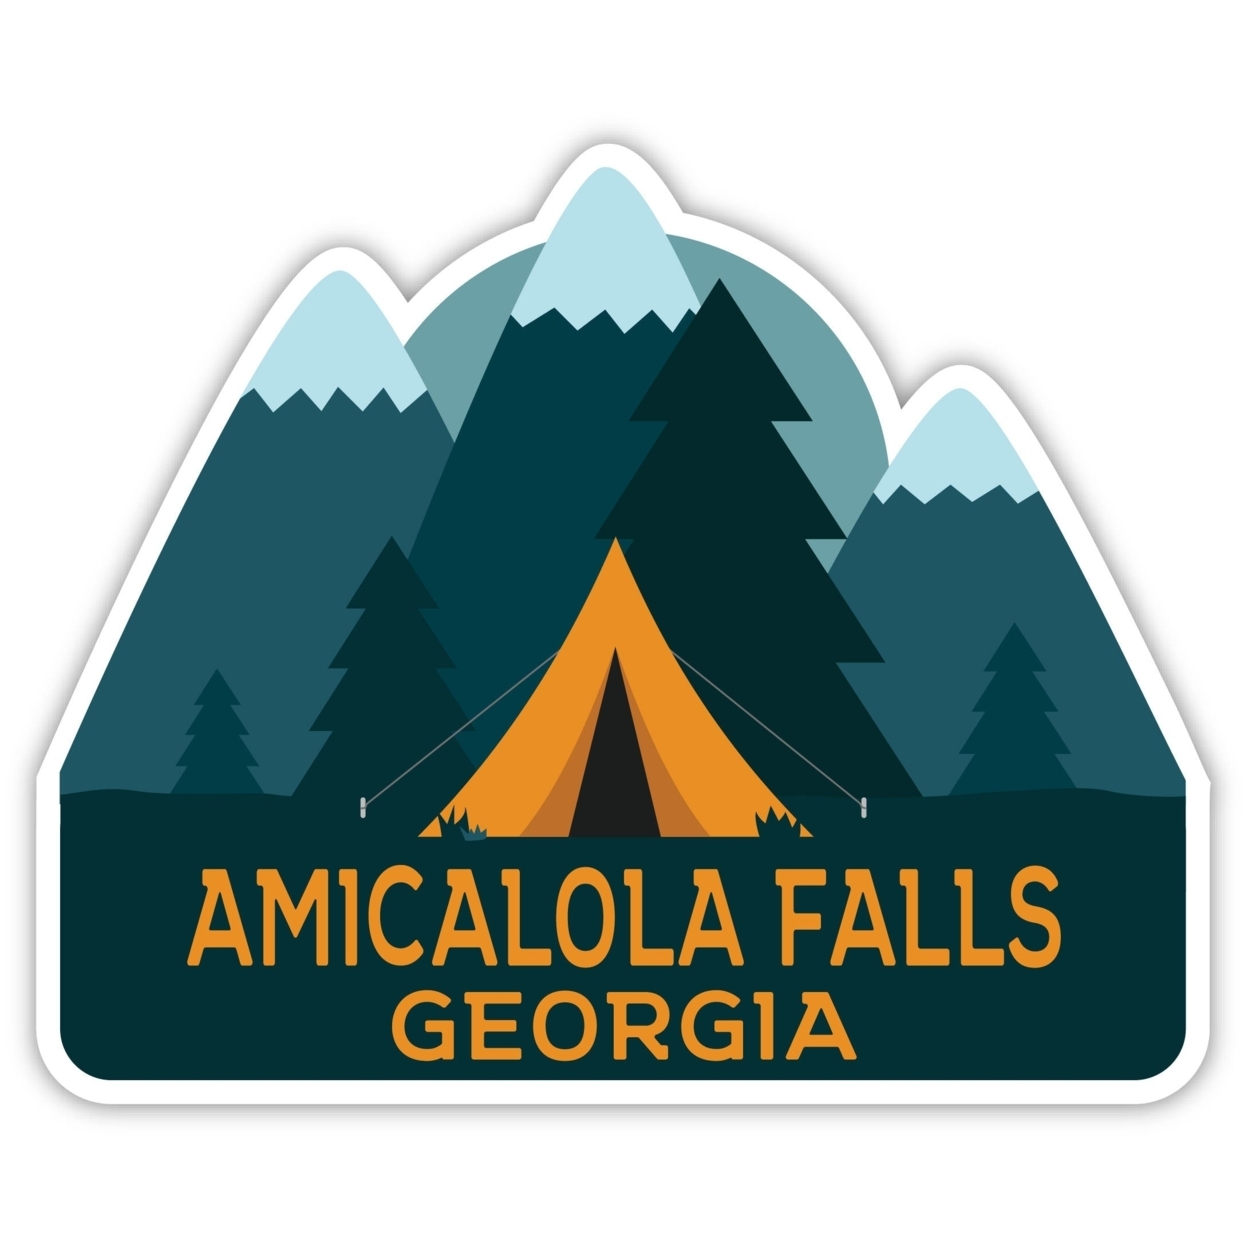 Amicalola Falls Georgia Souvenir Decorative Stickers (Choose Theme And Size) - 4-Pack, 2-Inch, Great Outdoors